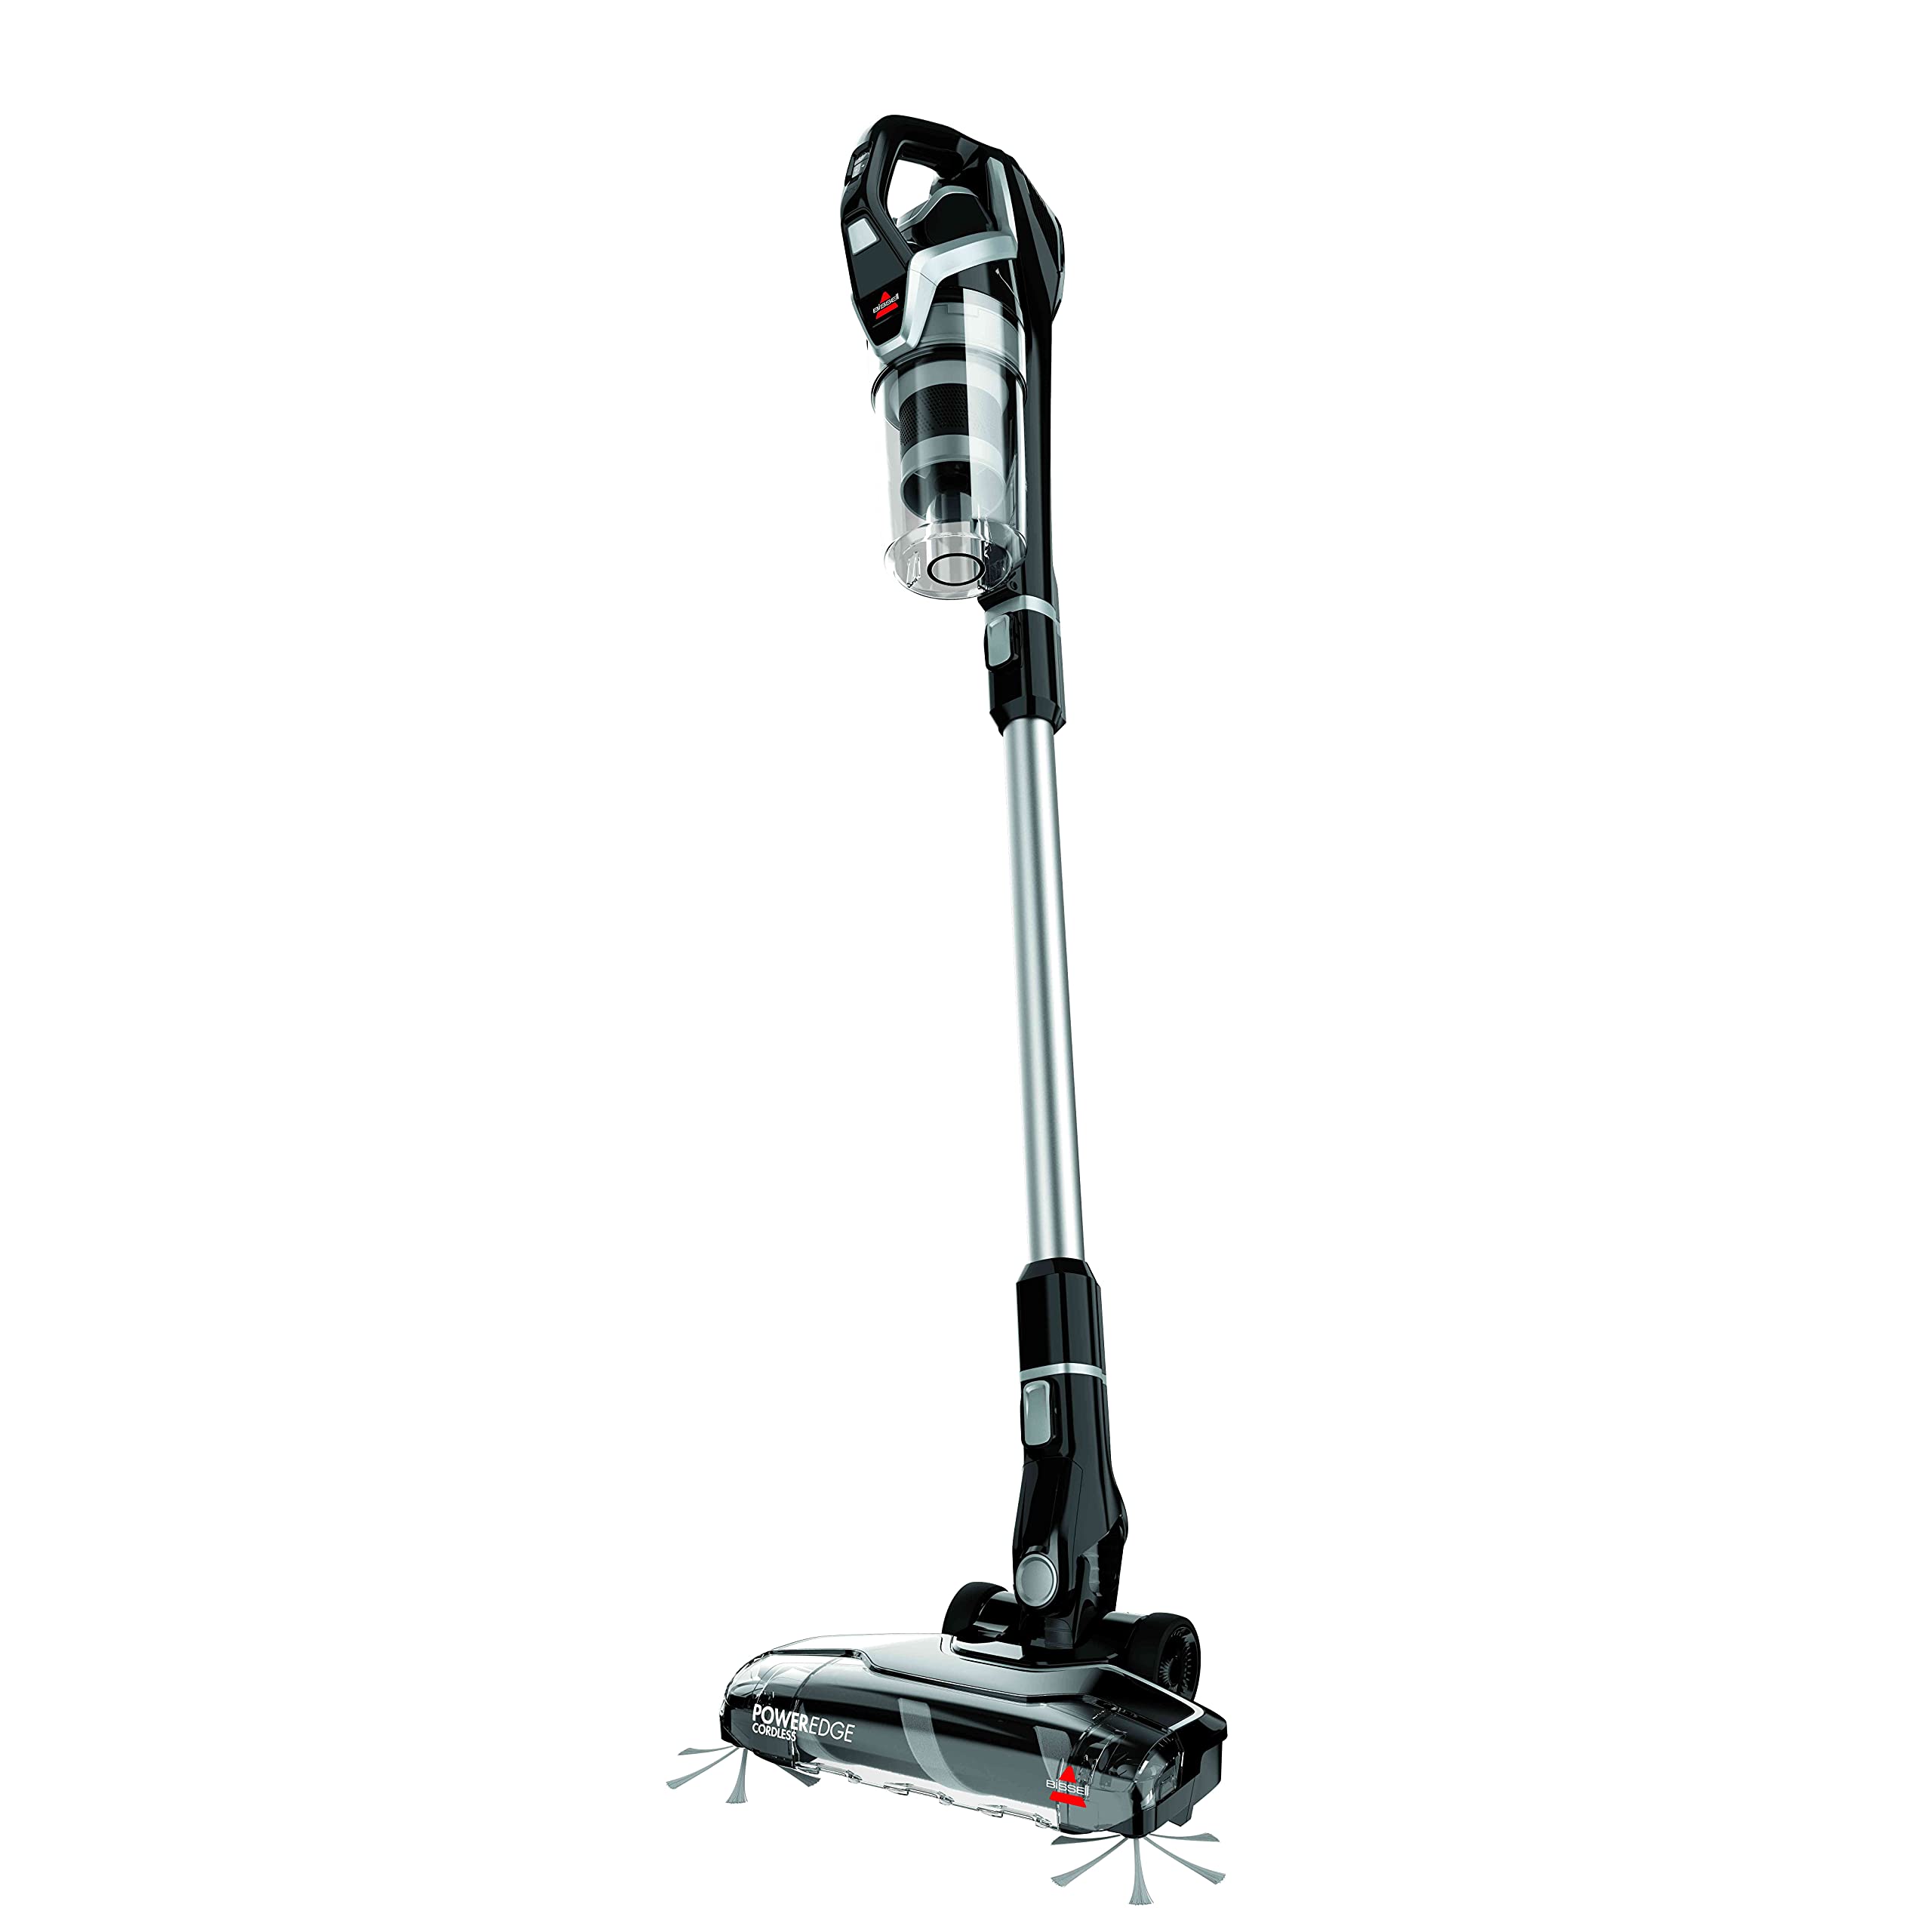 BISSELL | Stick Vacuum Poweredge Cordless 21V (3111G), Black/Grey-2 years manufacturing warranty